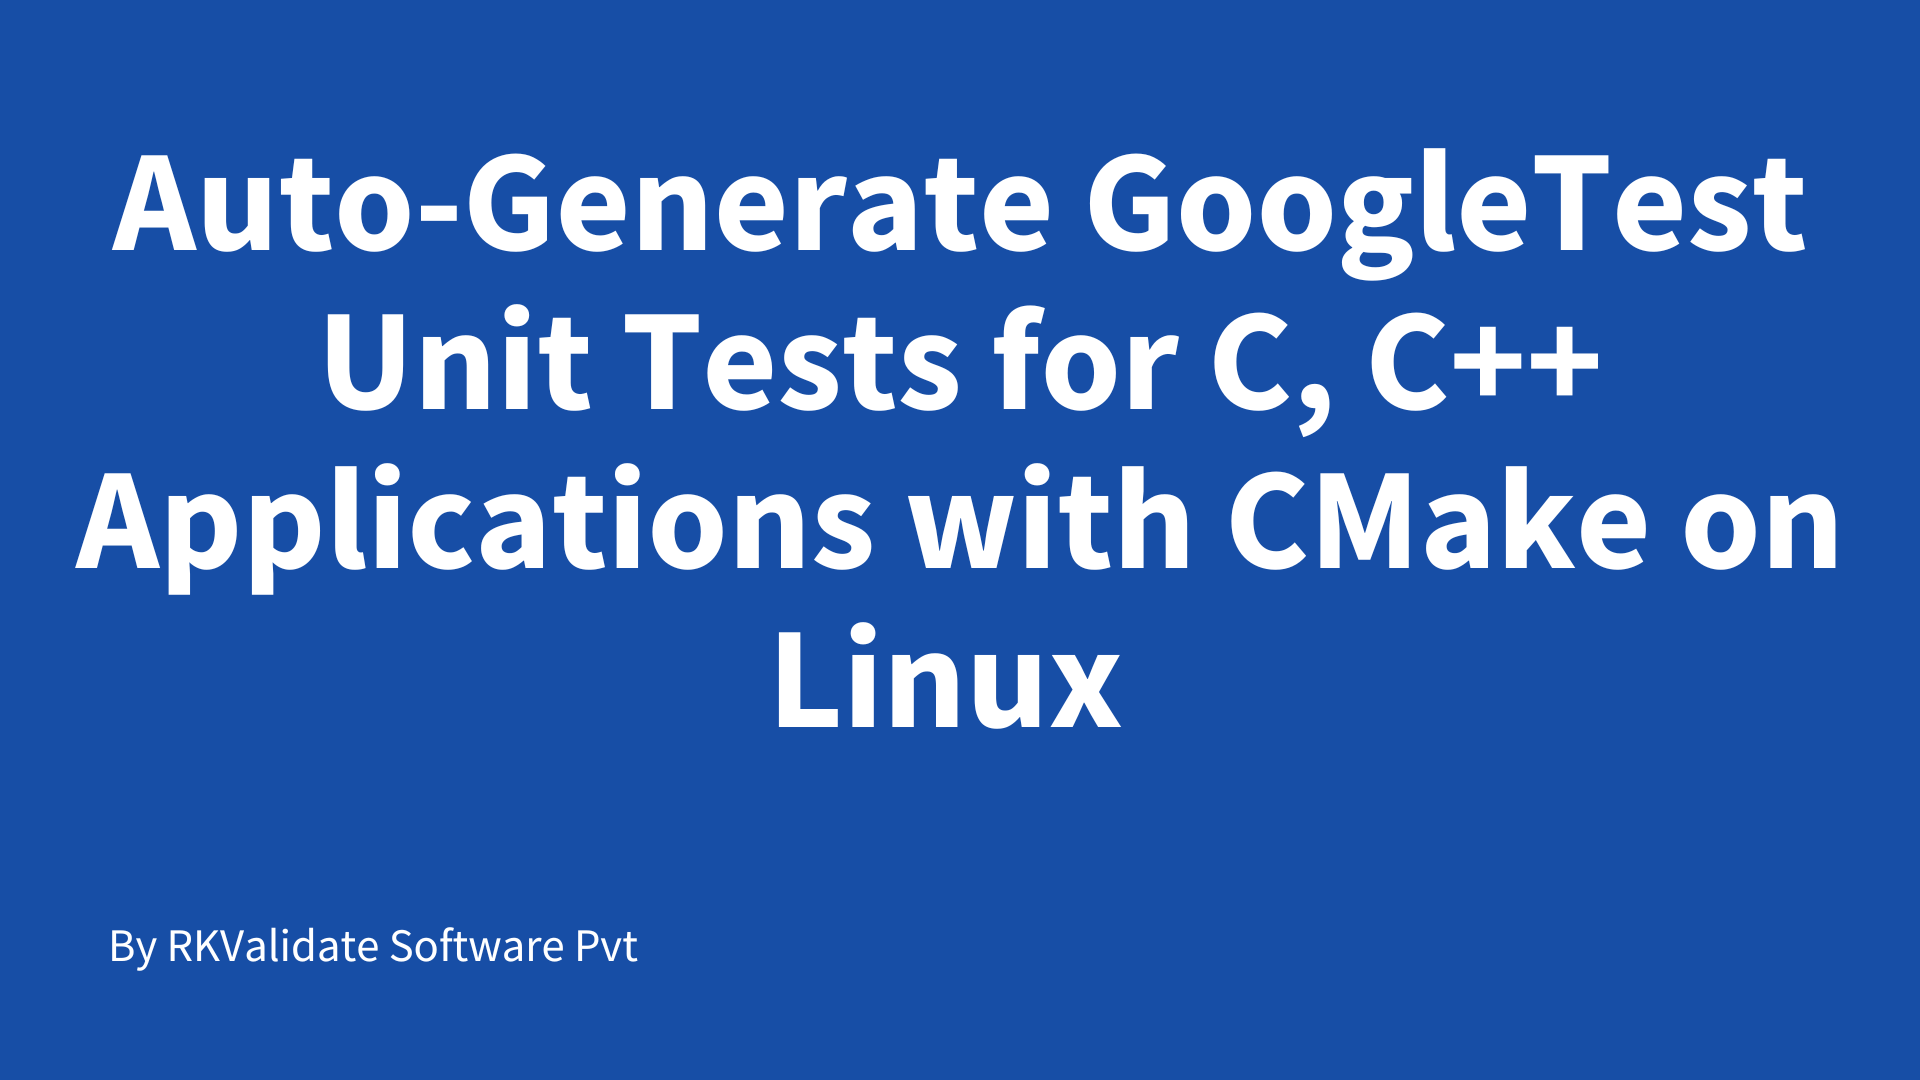 Auto-Generate GoogleTest Unit Tests for C, C++ Applications with Cmake in Linux